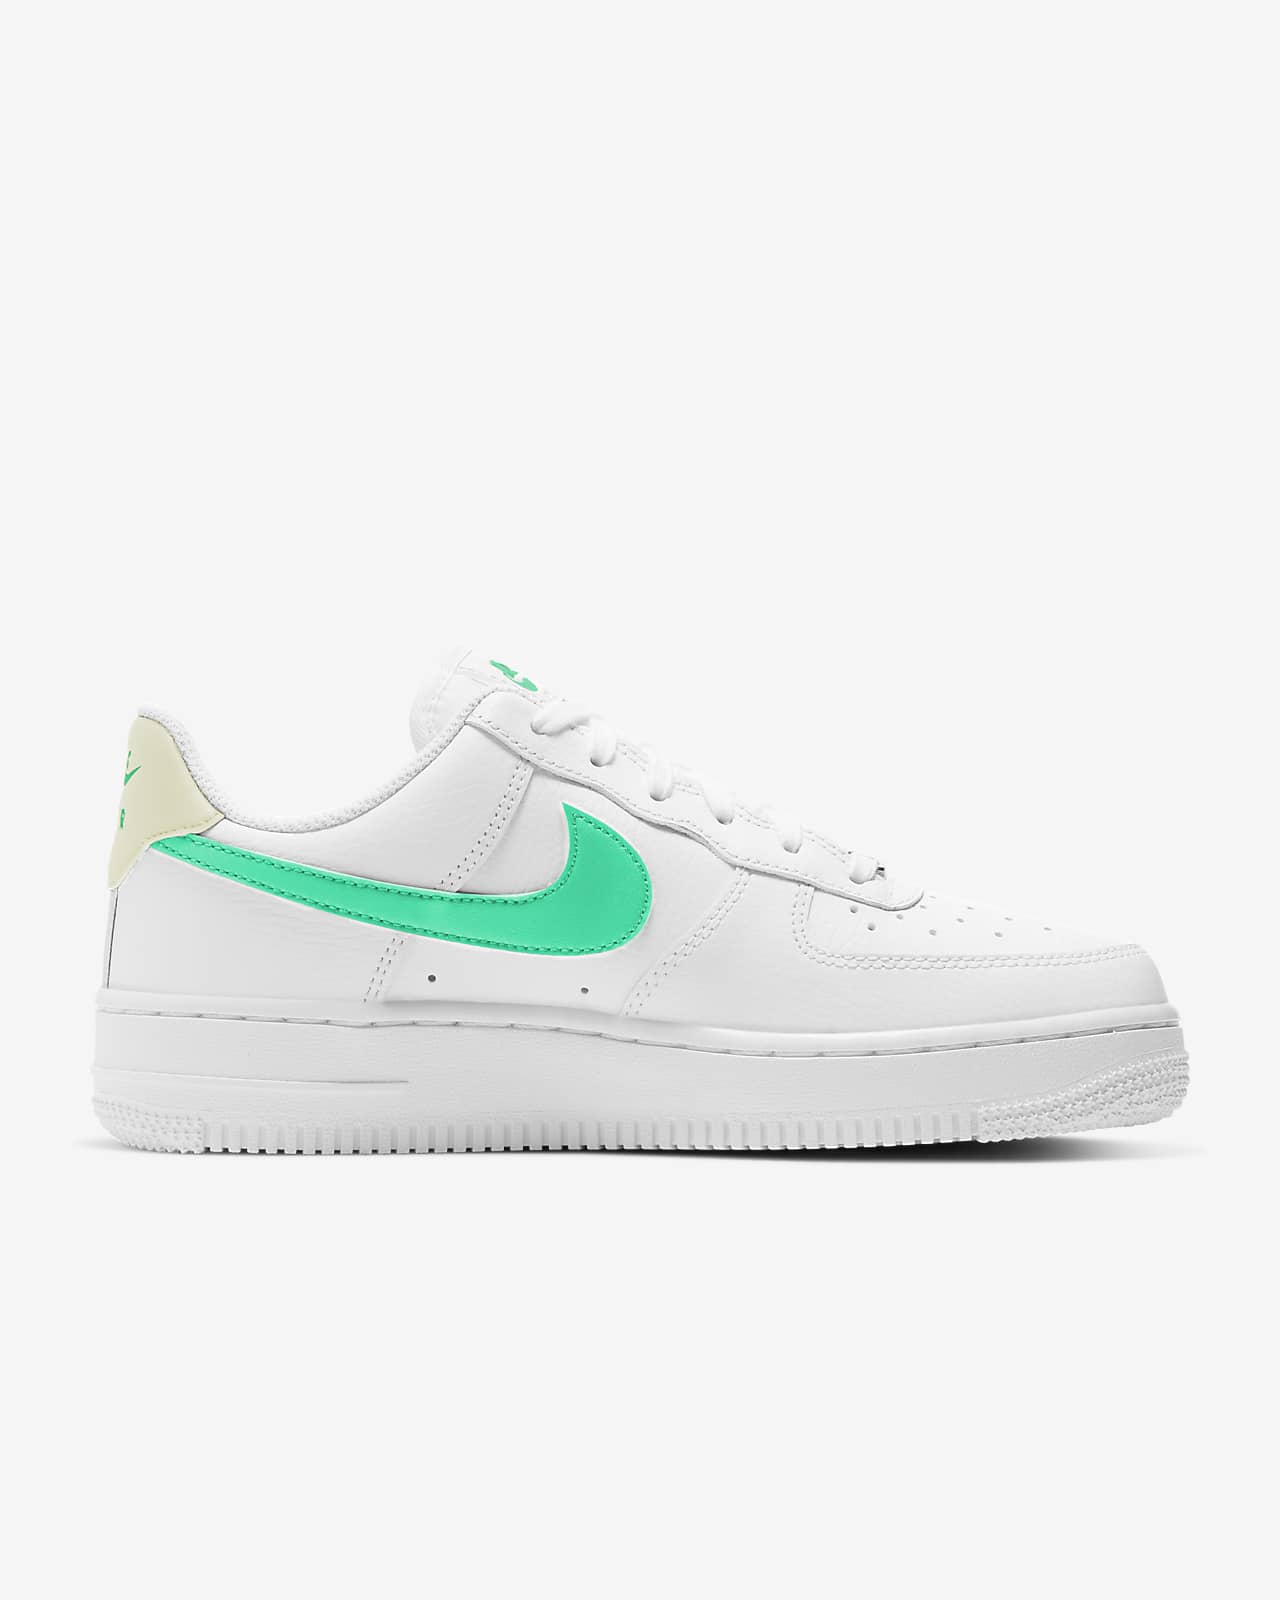 nike air force one 07 low